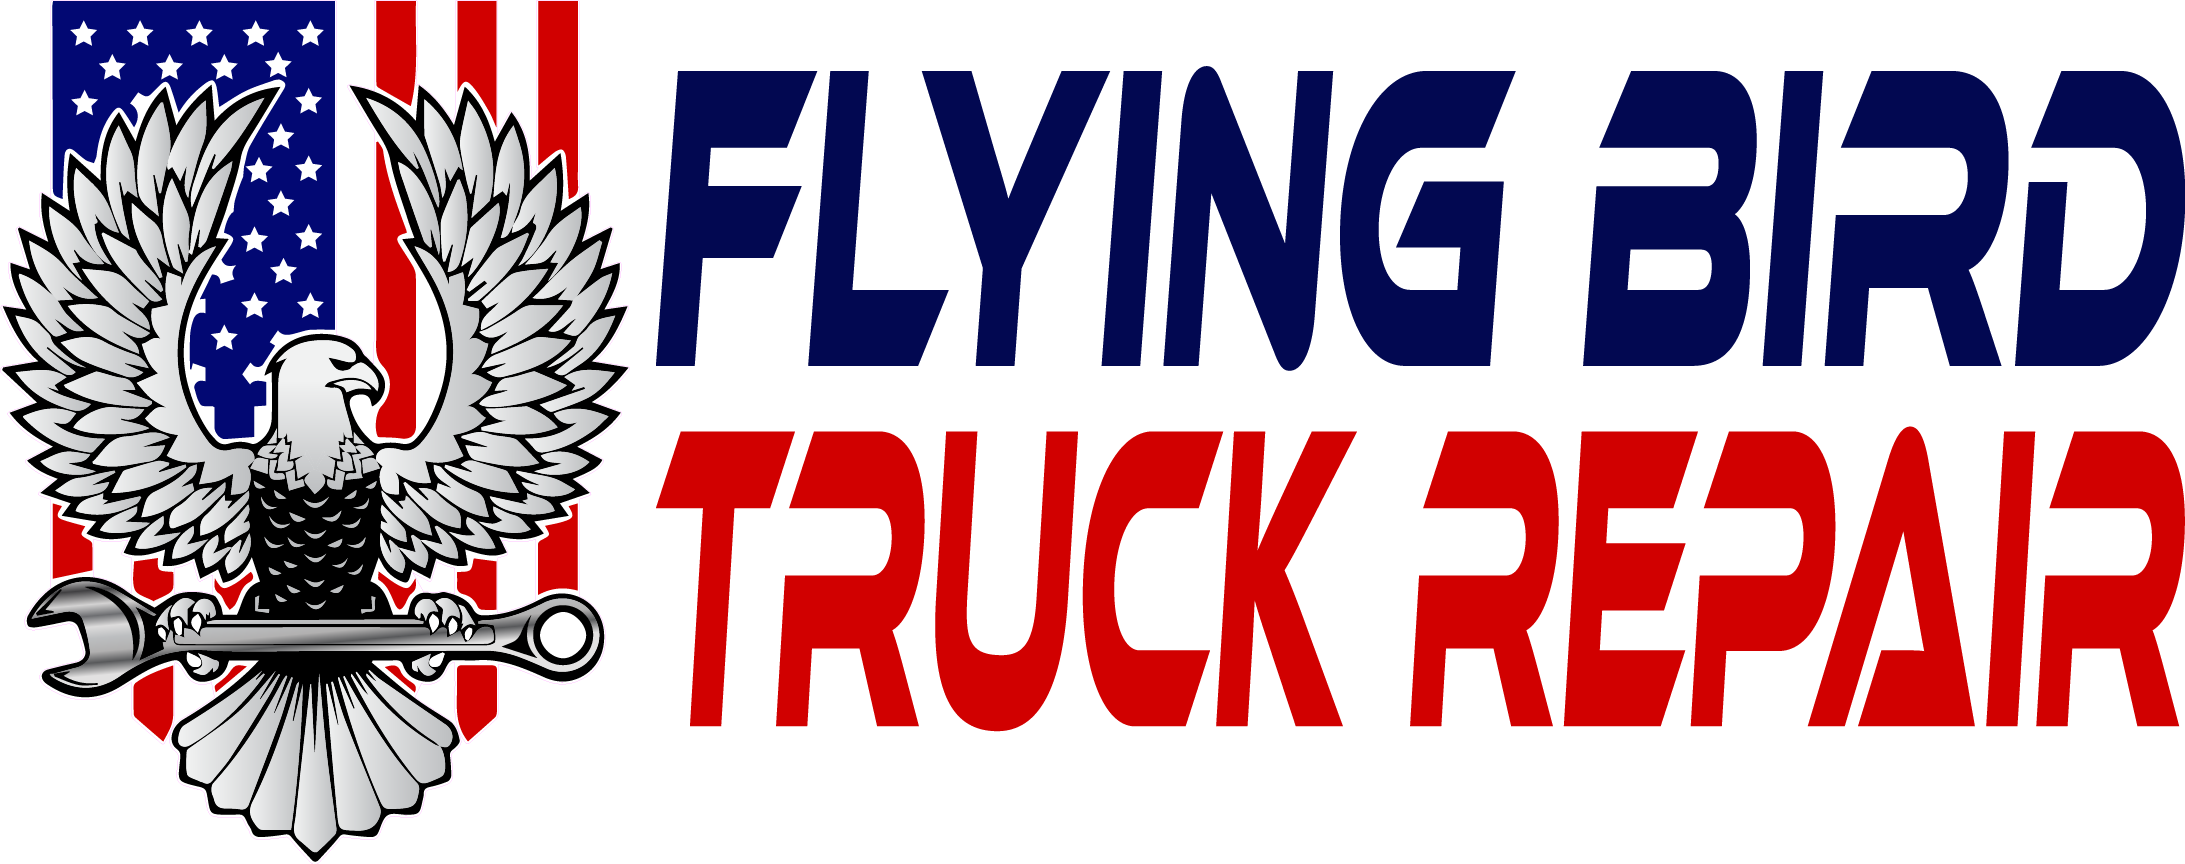 Truck Dpf Cleaning Services | Flying Bird Truck Repair